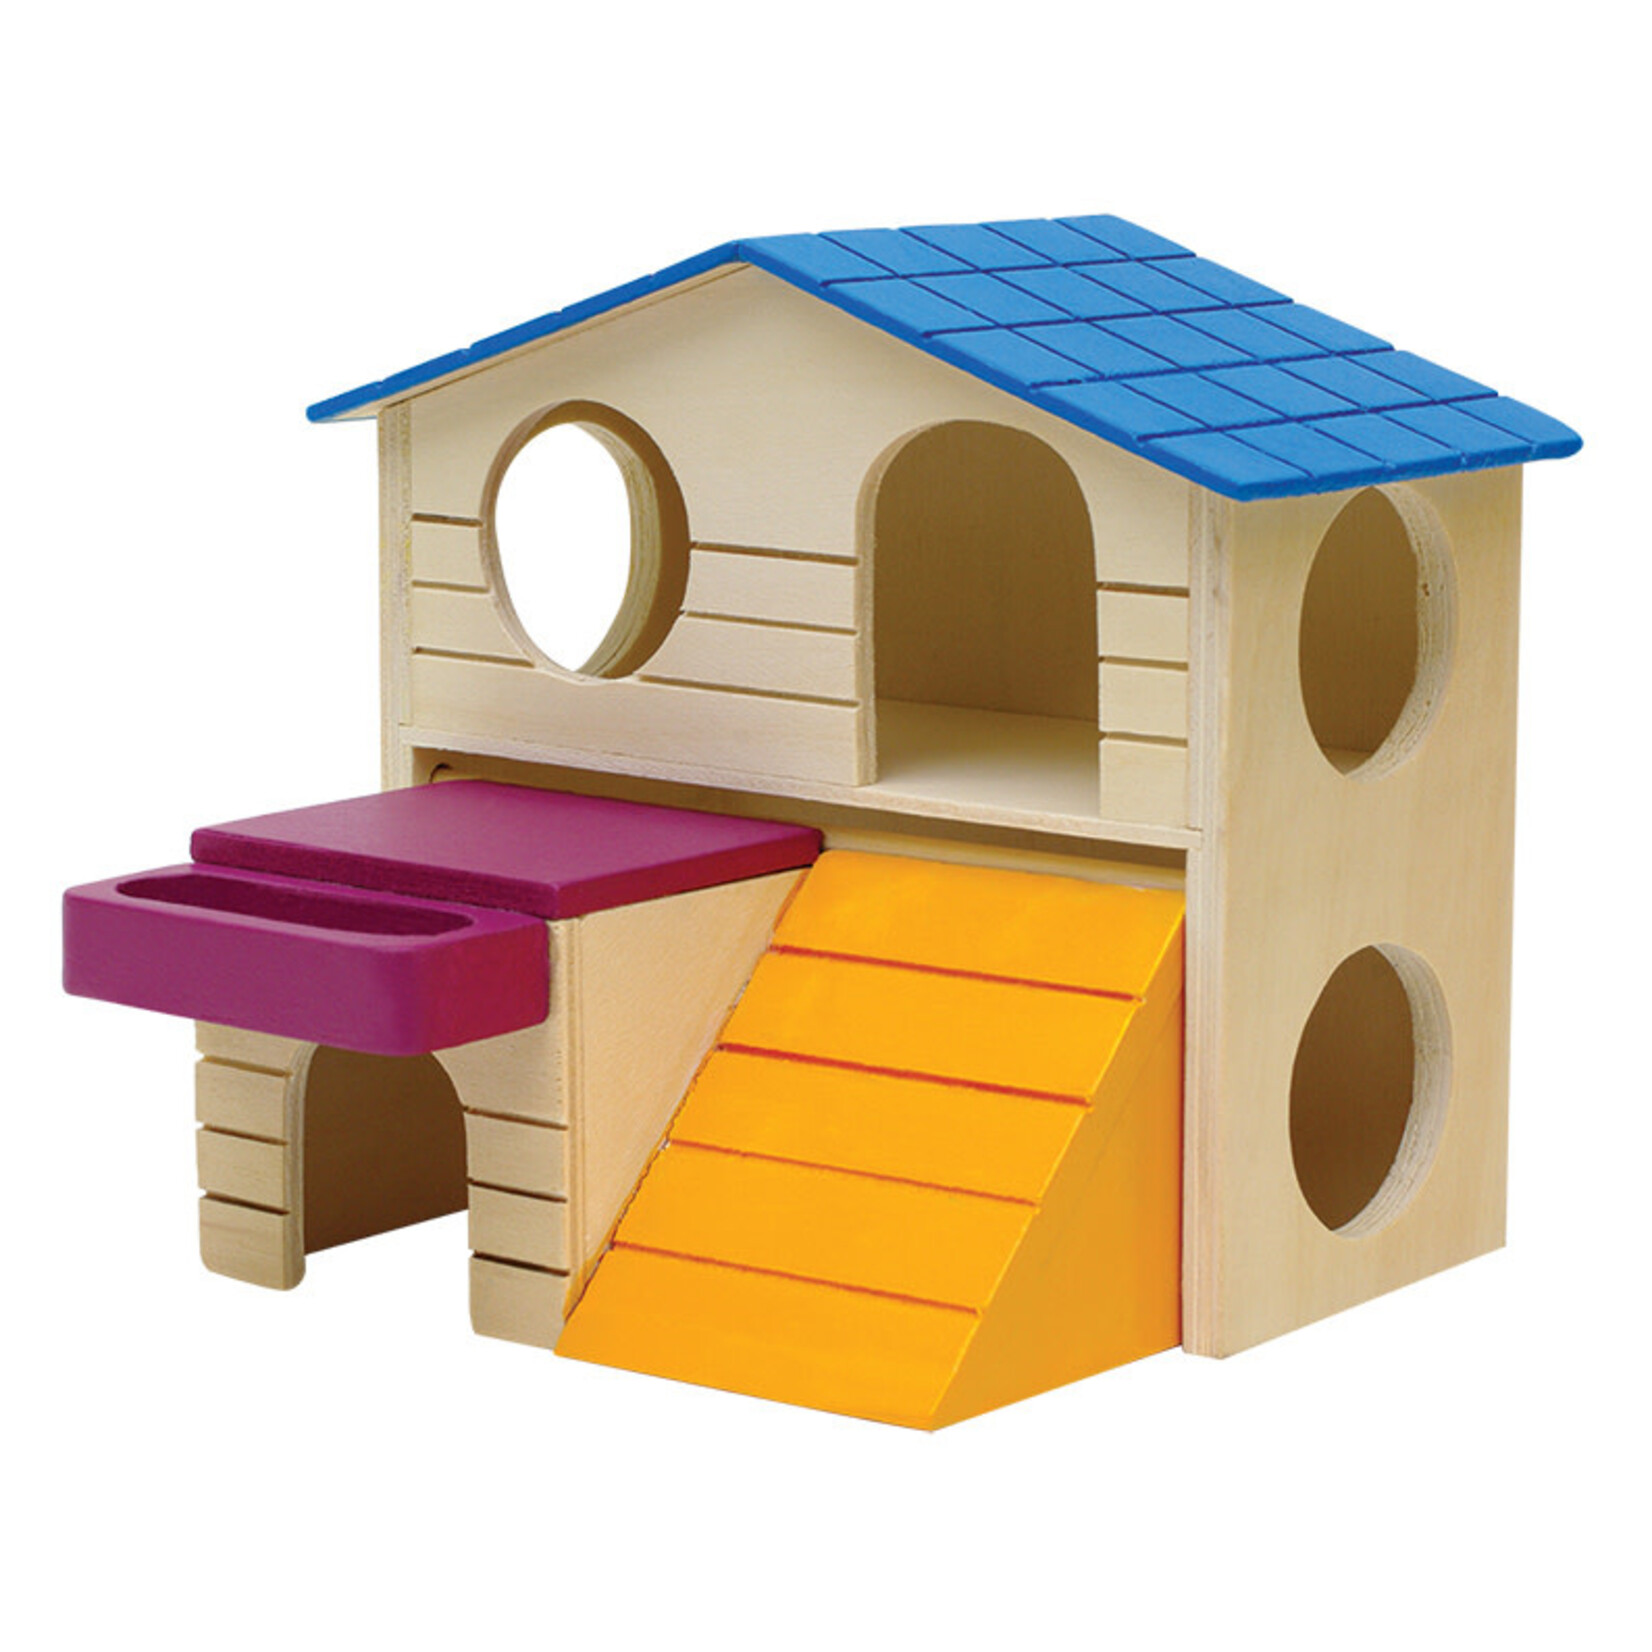 LIVING WORLD Living World Playground Play House - Large - 16.5 x 16.5 x 15 cm (6.5 x 6.5 x 5.9in)